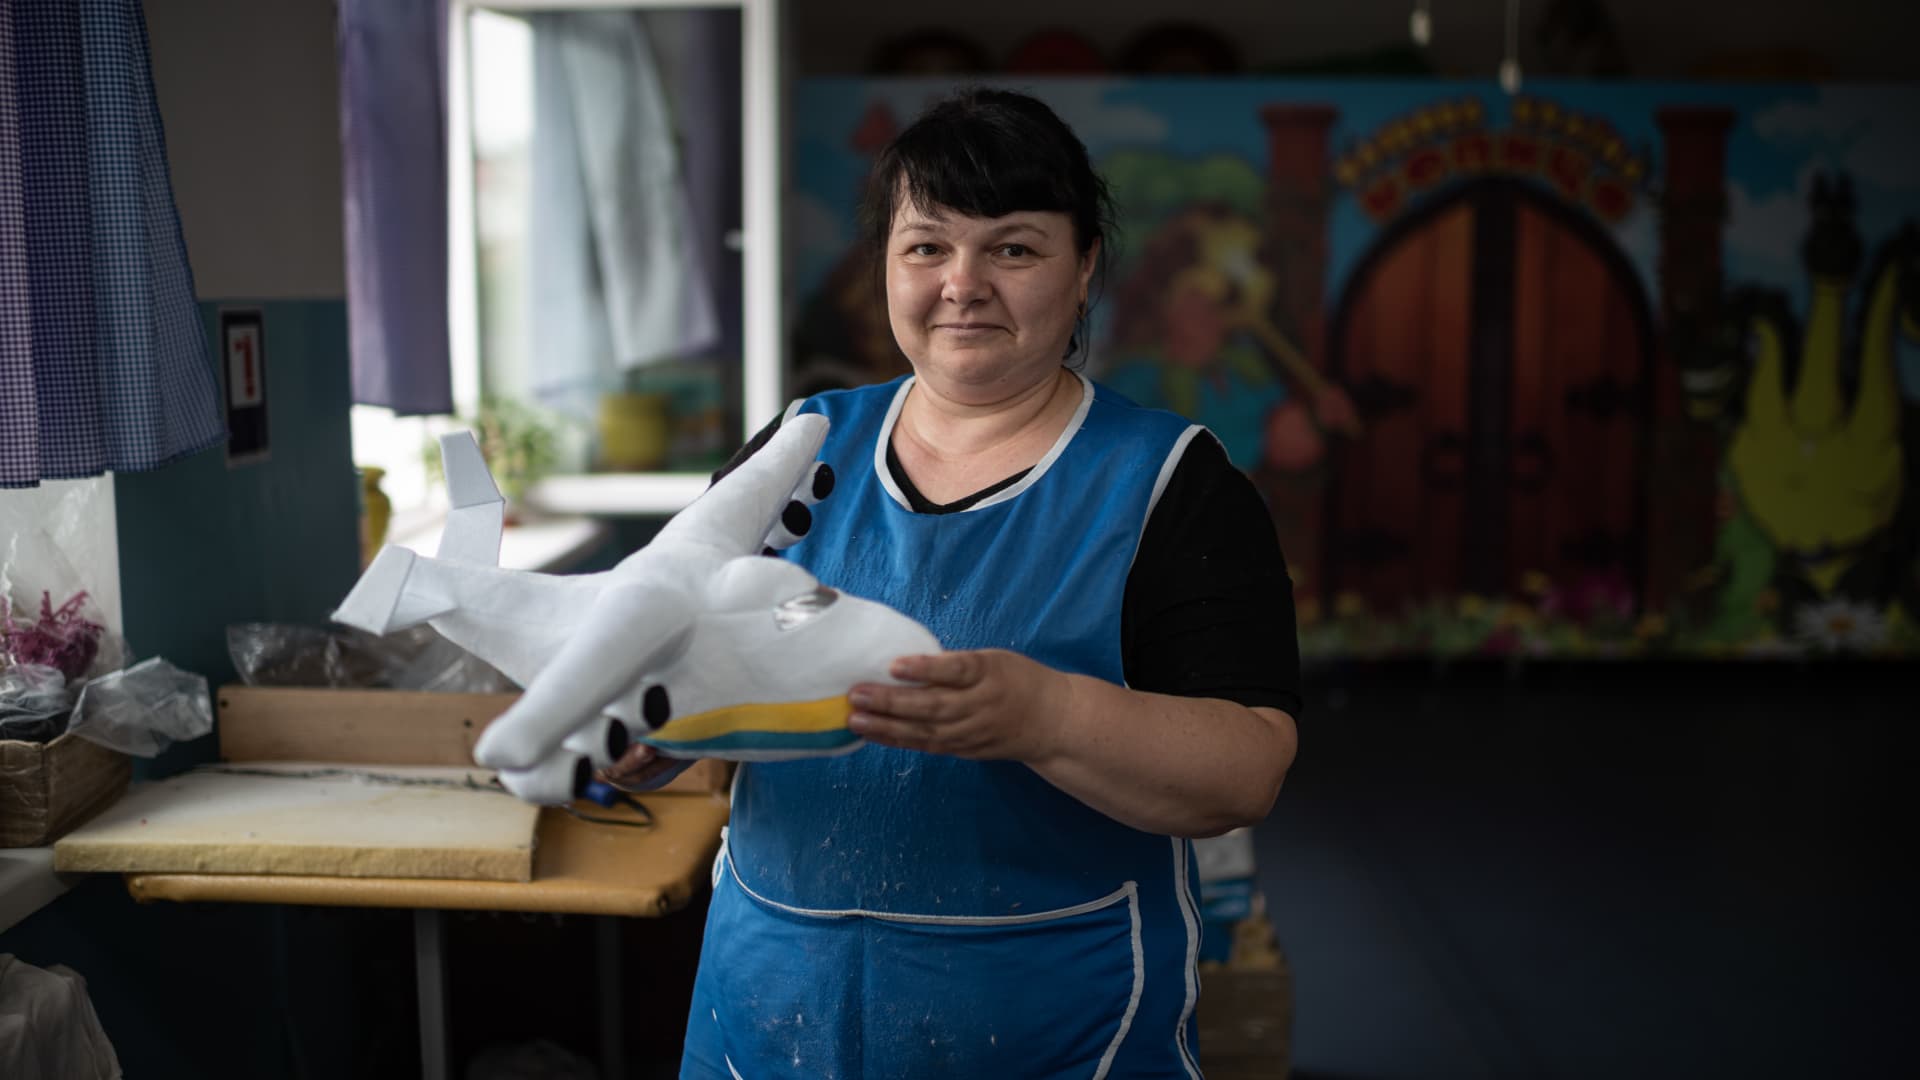 Nina, a worker of the Kopytsia tory factory, poses for a portrait with the Mriia airplane toy on August 10, 2022 in Nizhyn, Ukraine. 